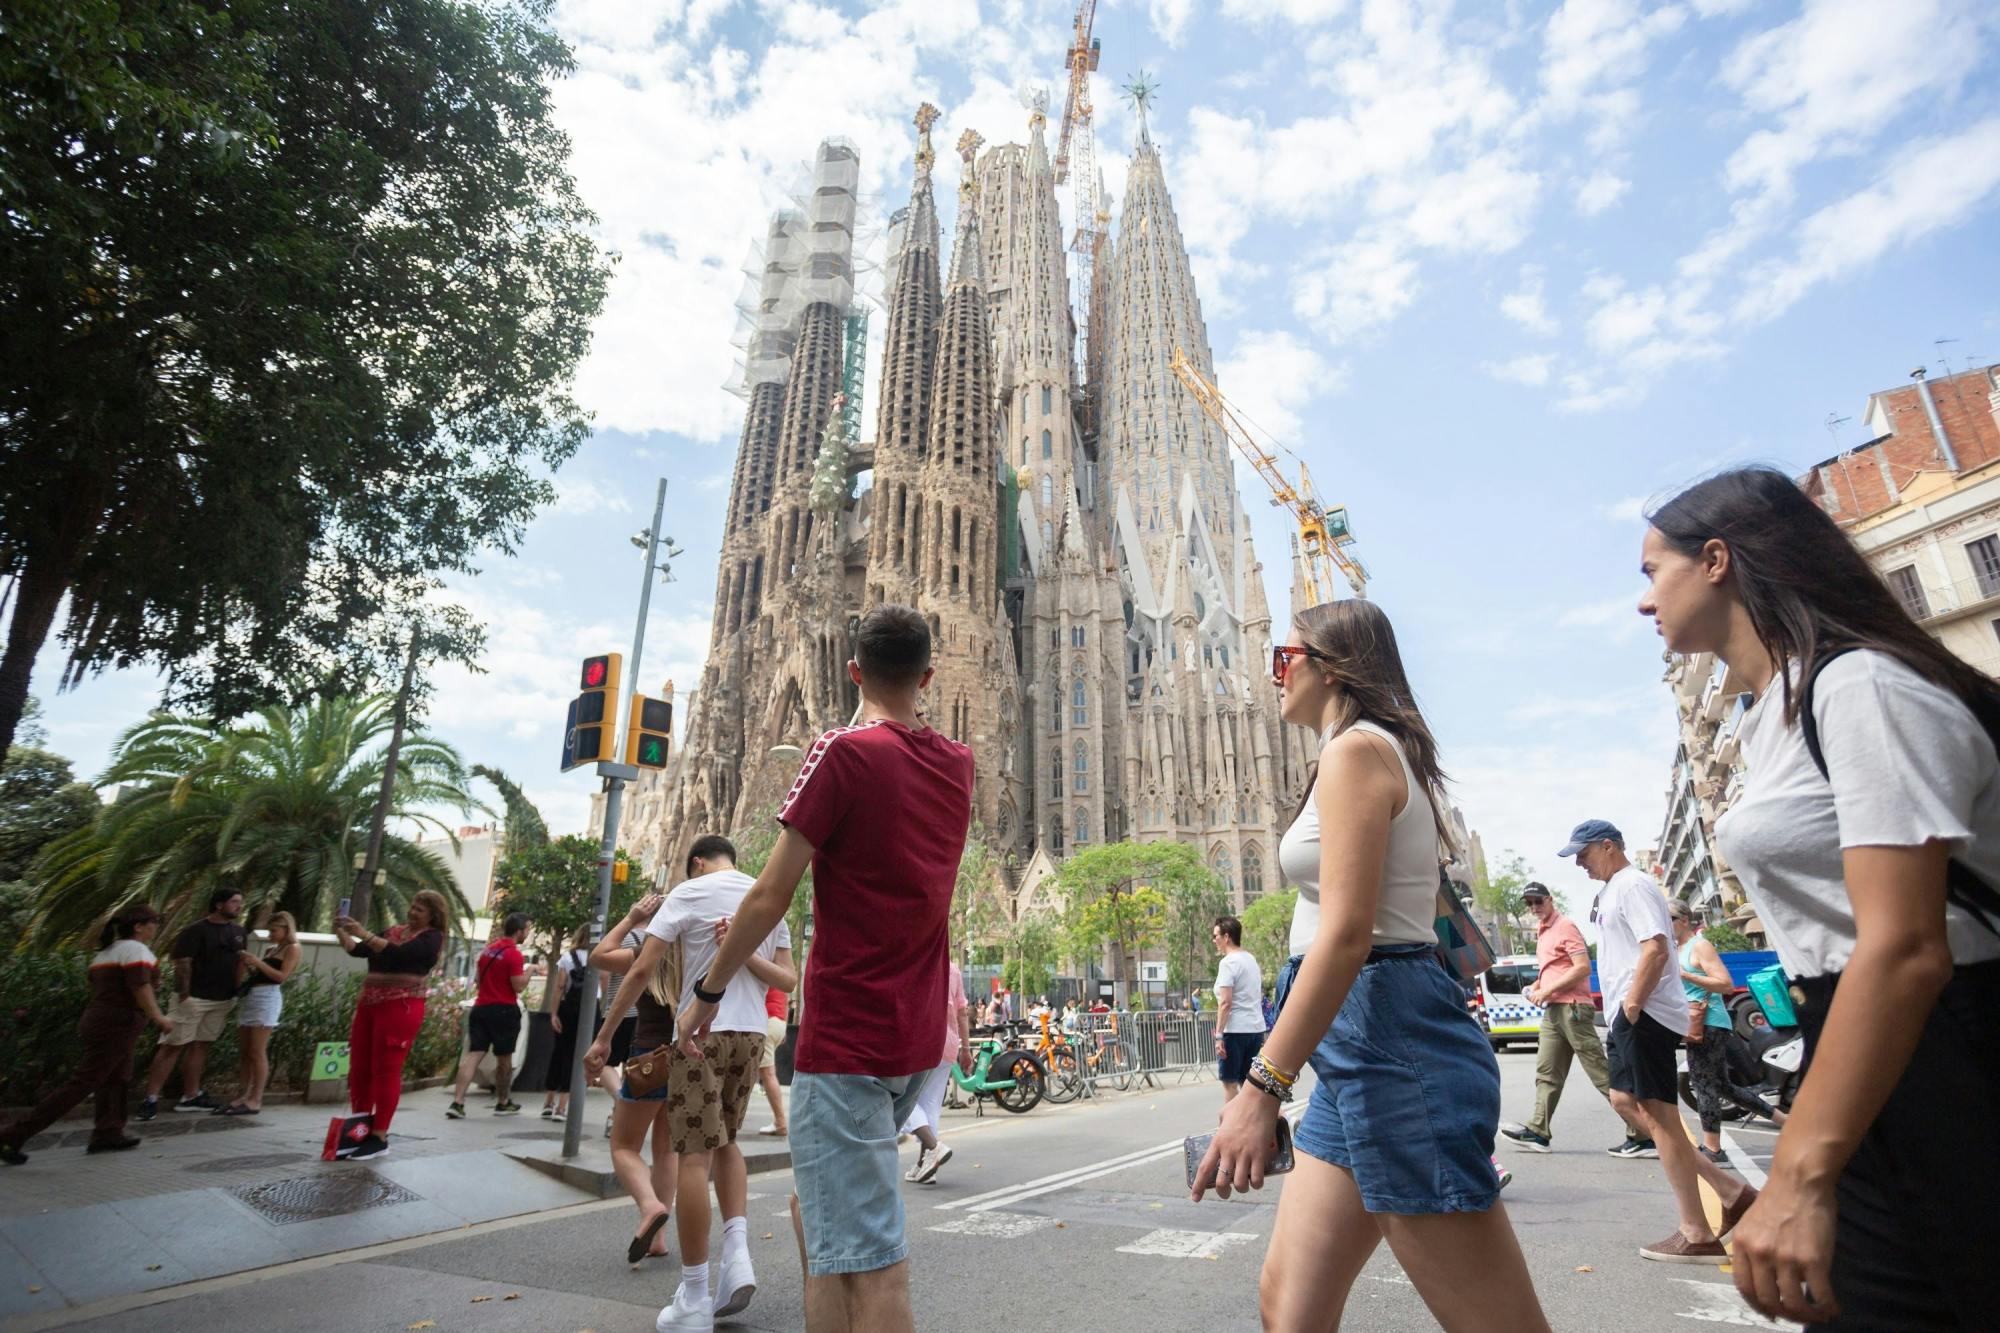 Tickets and guided visit to the Sagrada Família Musement